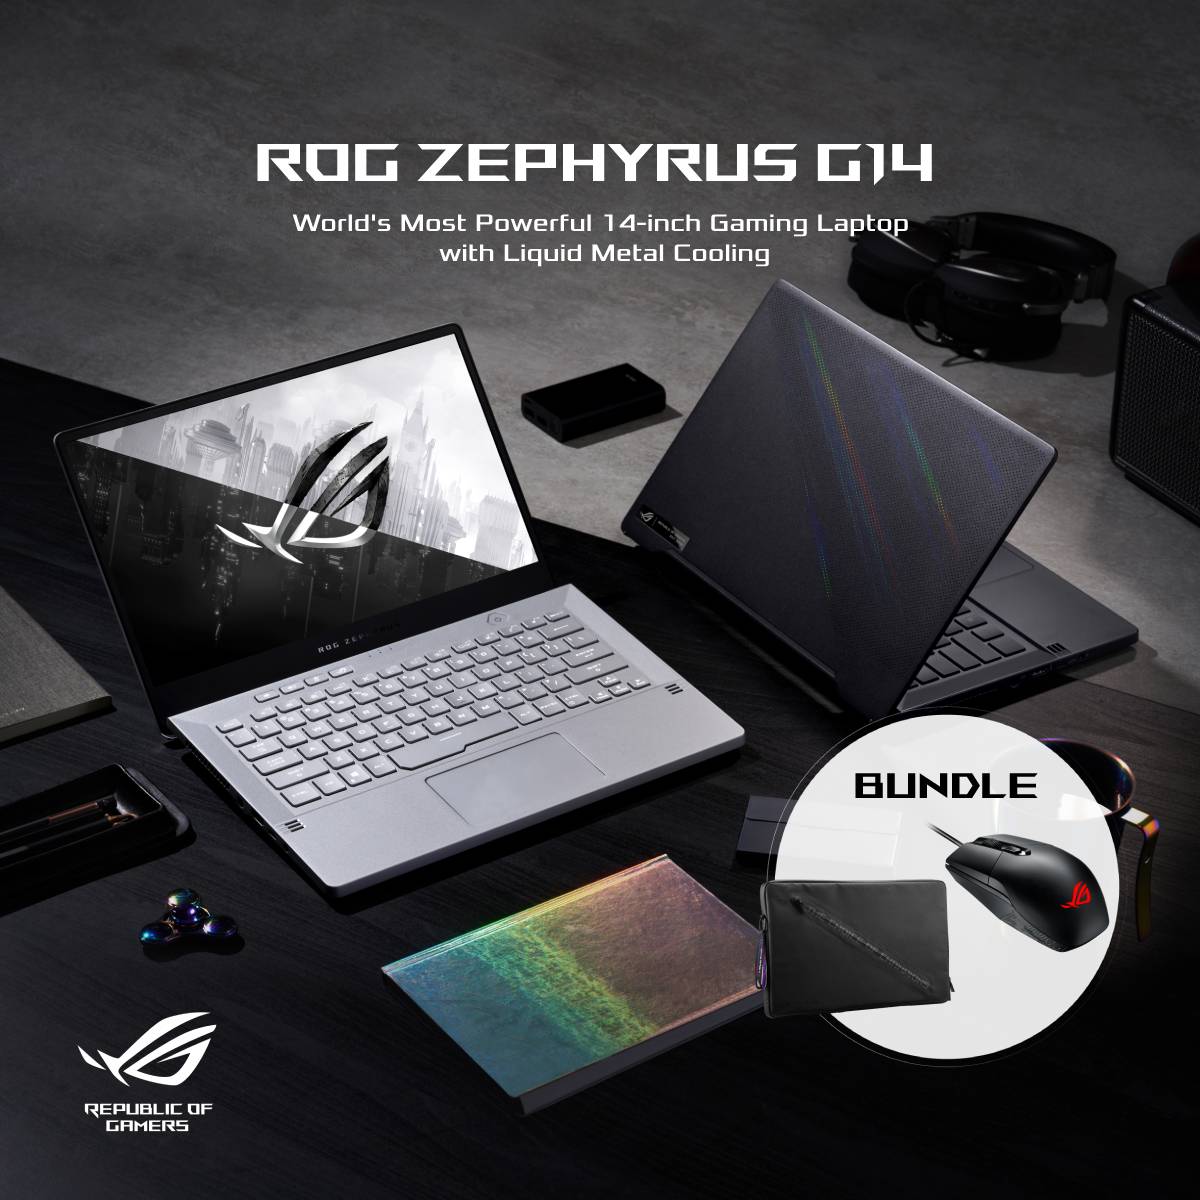 ASUS ROG Zephyrus G14 and Other RTX 3060 Gaming Laptops Coming in April